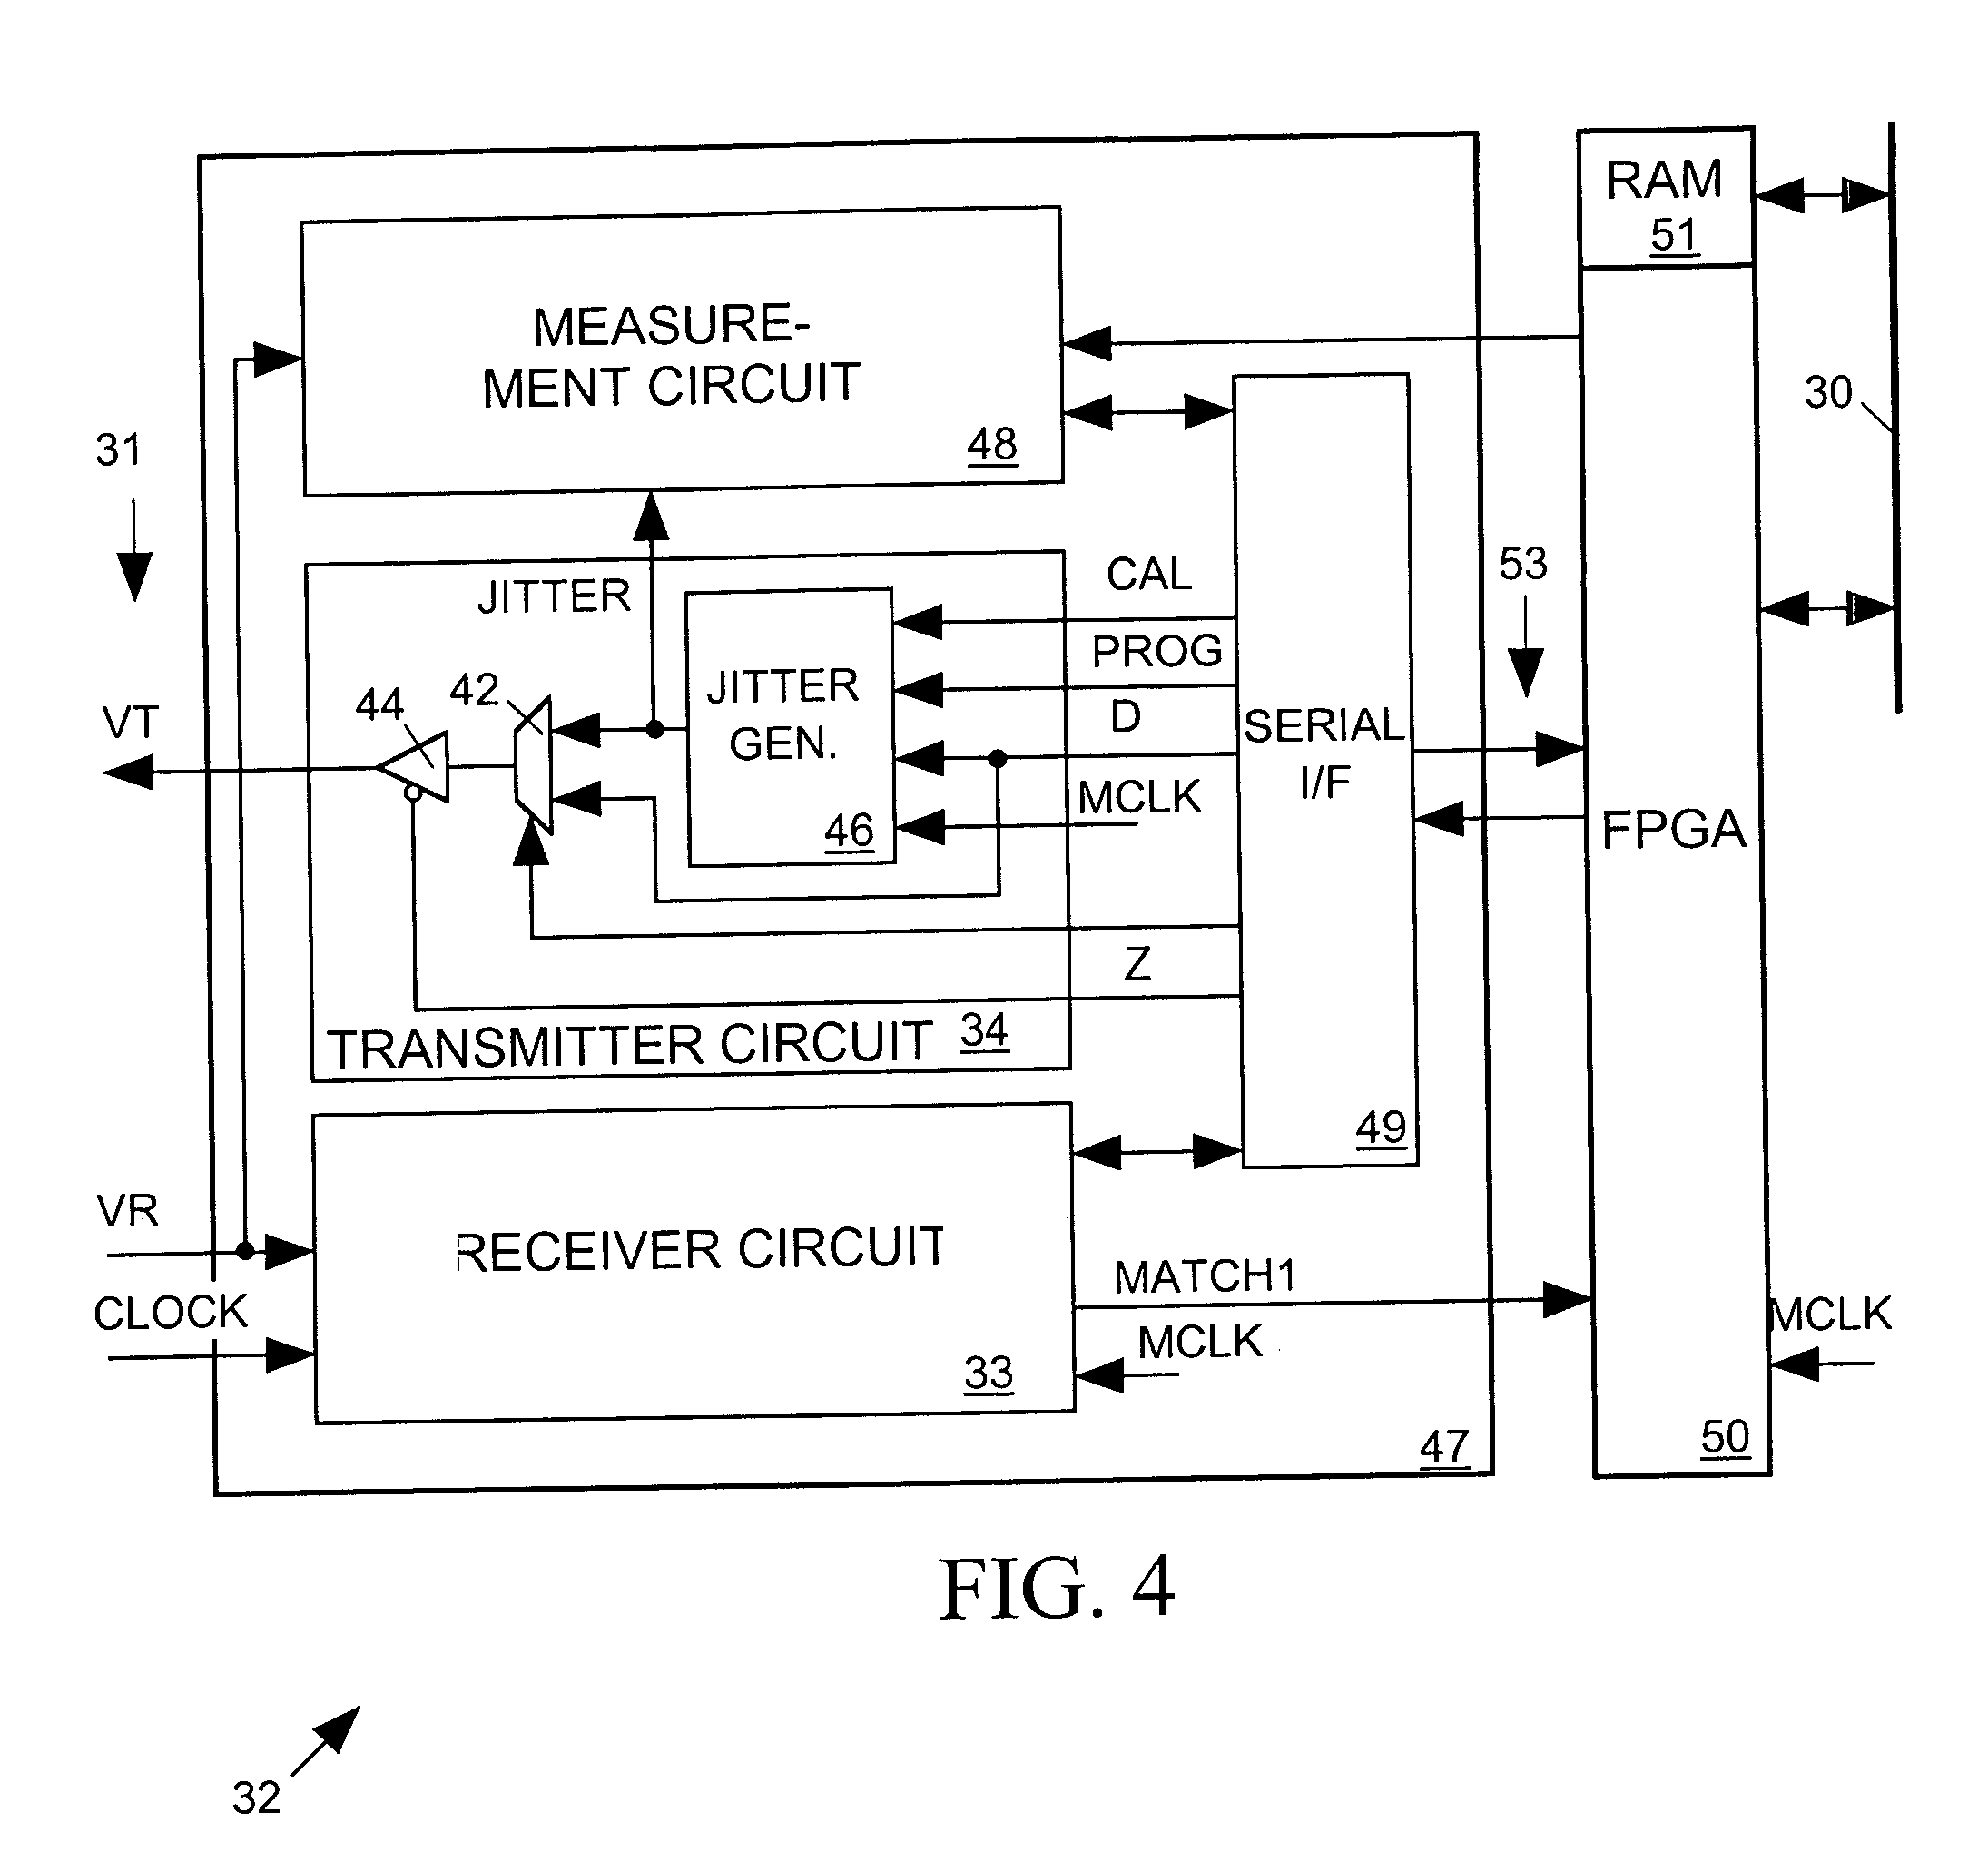 Apparatus for jitter testing an IC